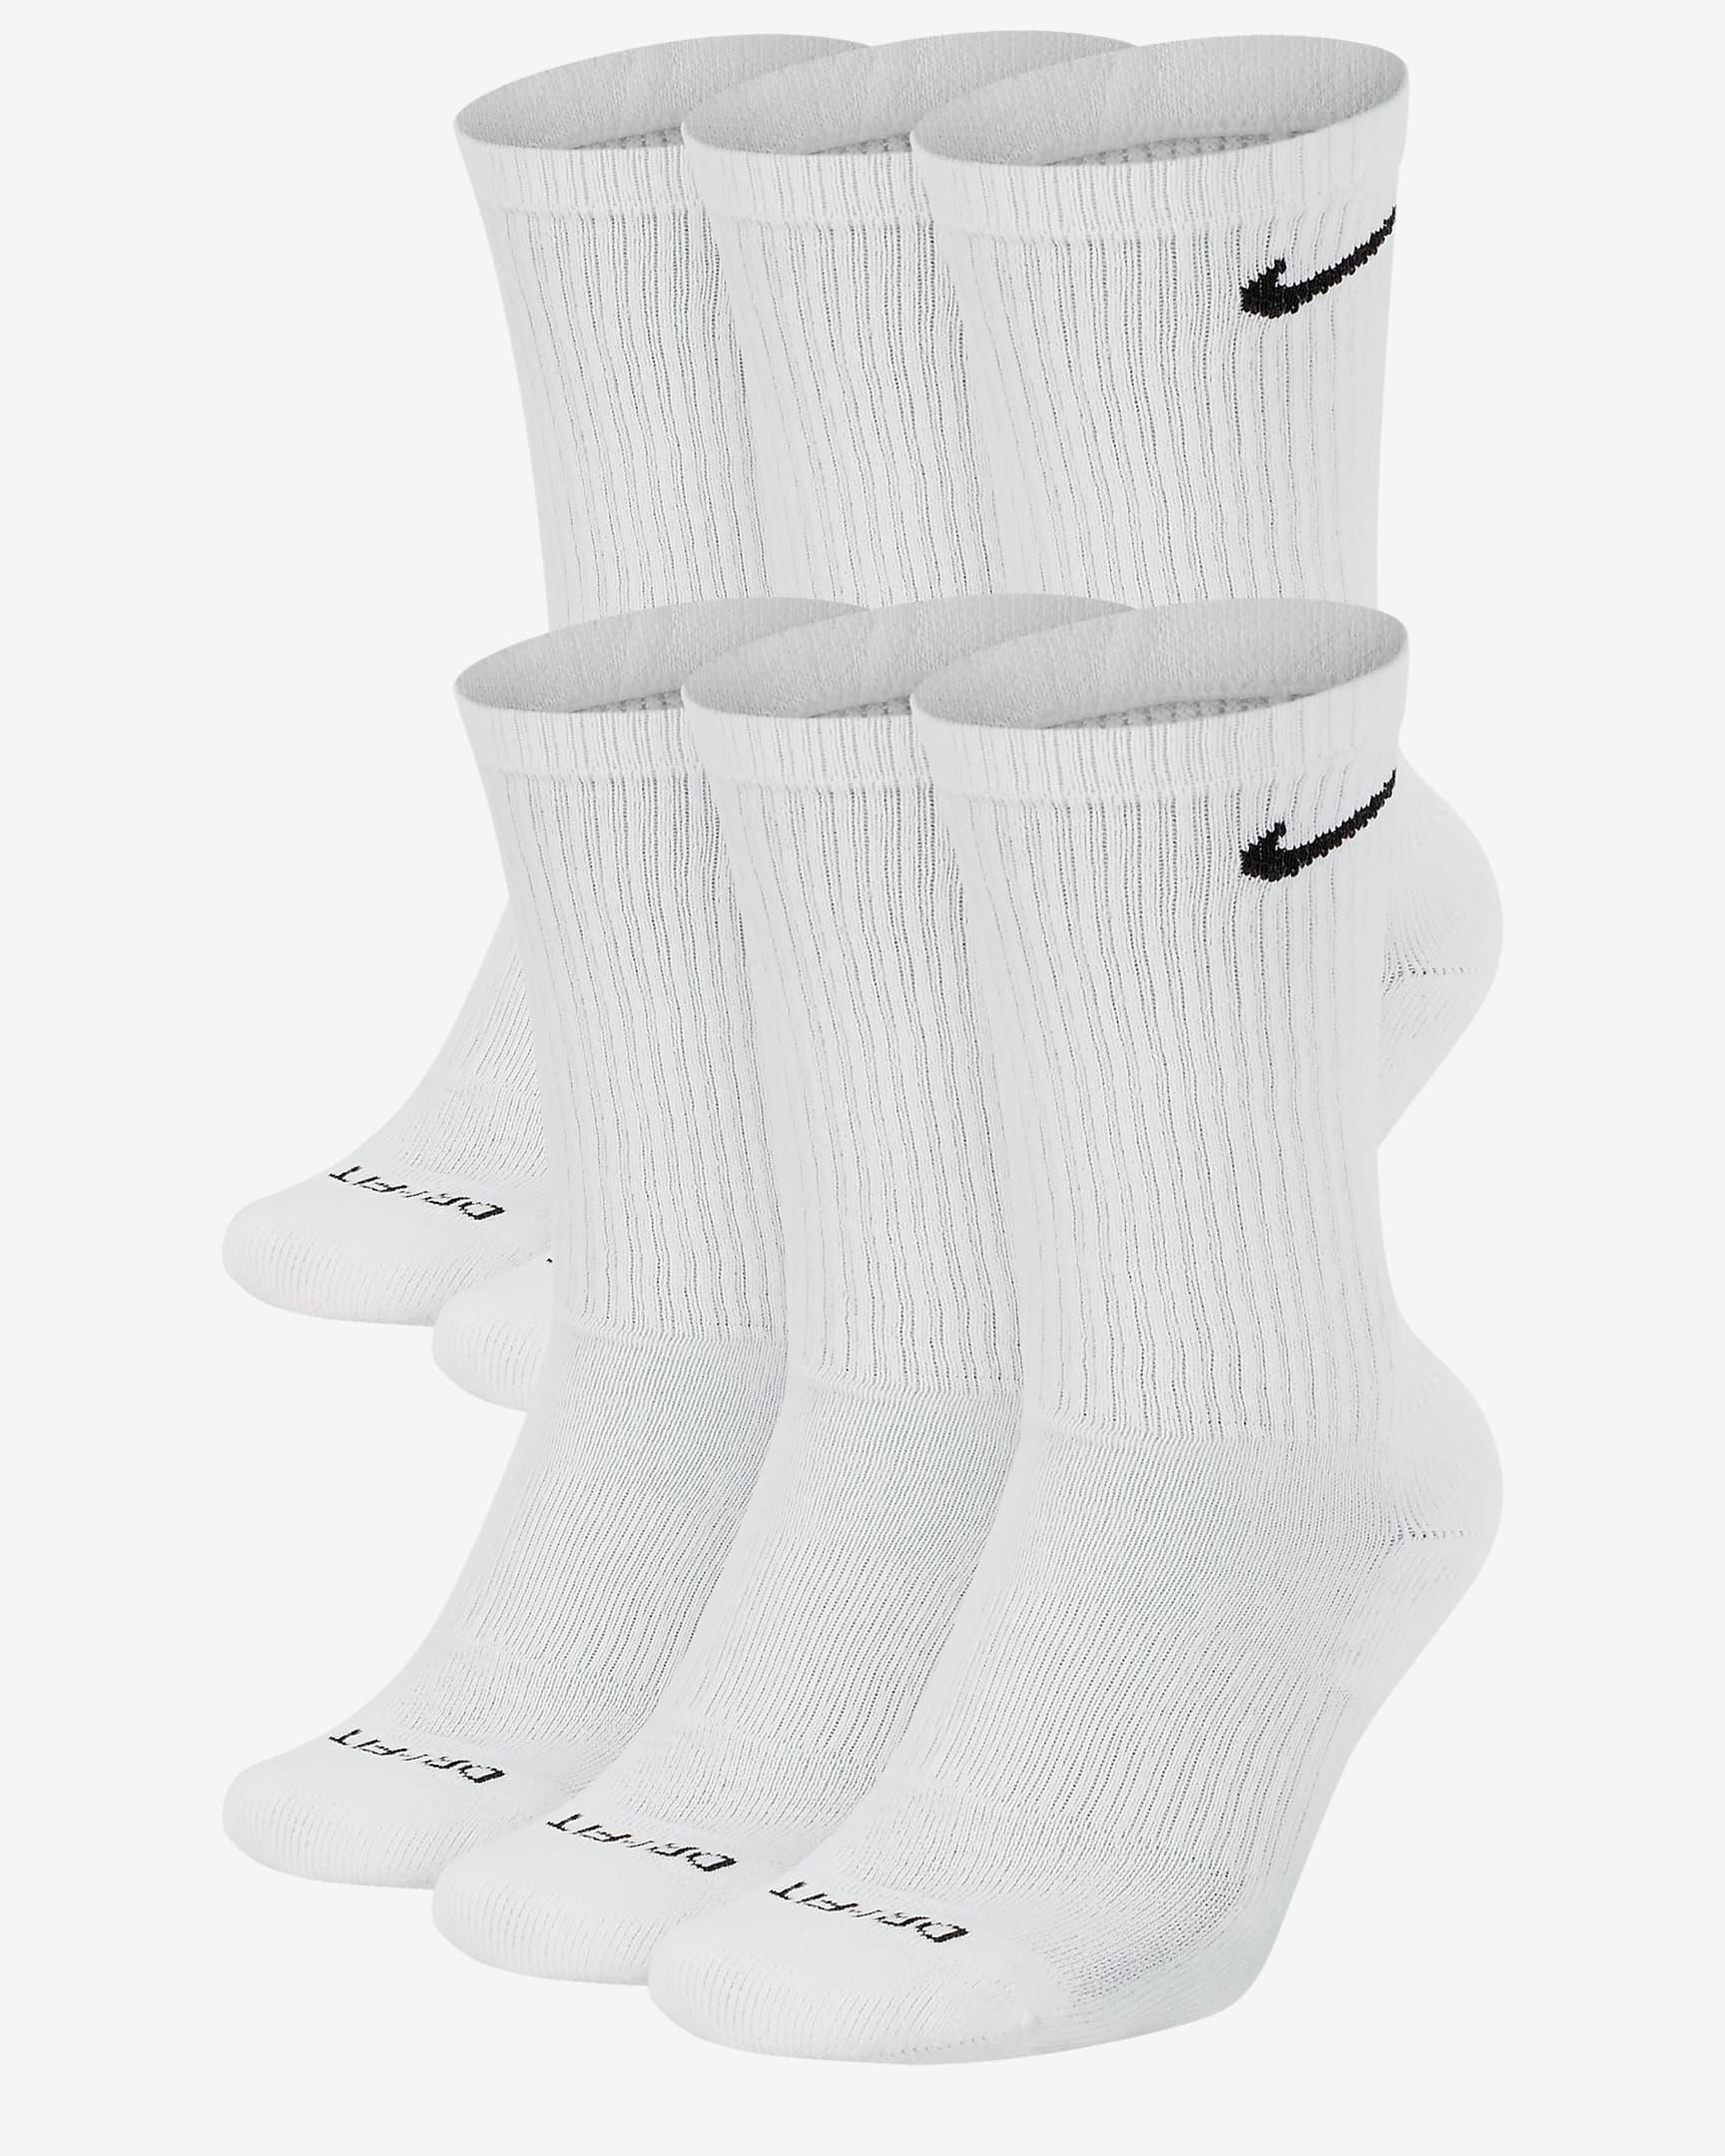 8 Outfits That Prove Nike Socks Are Fashion's Latest It Item